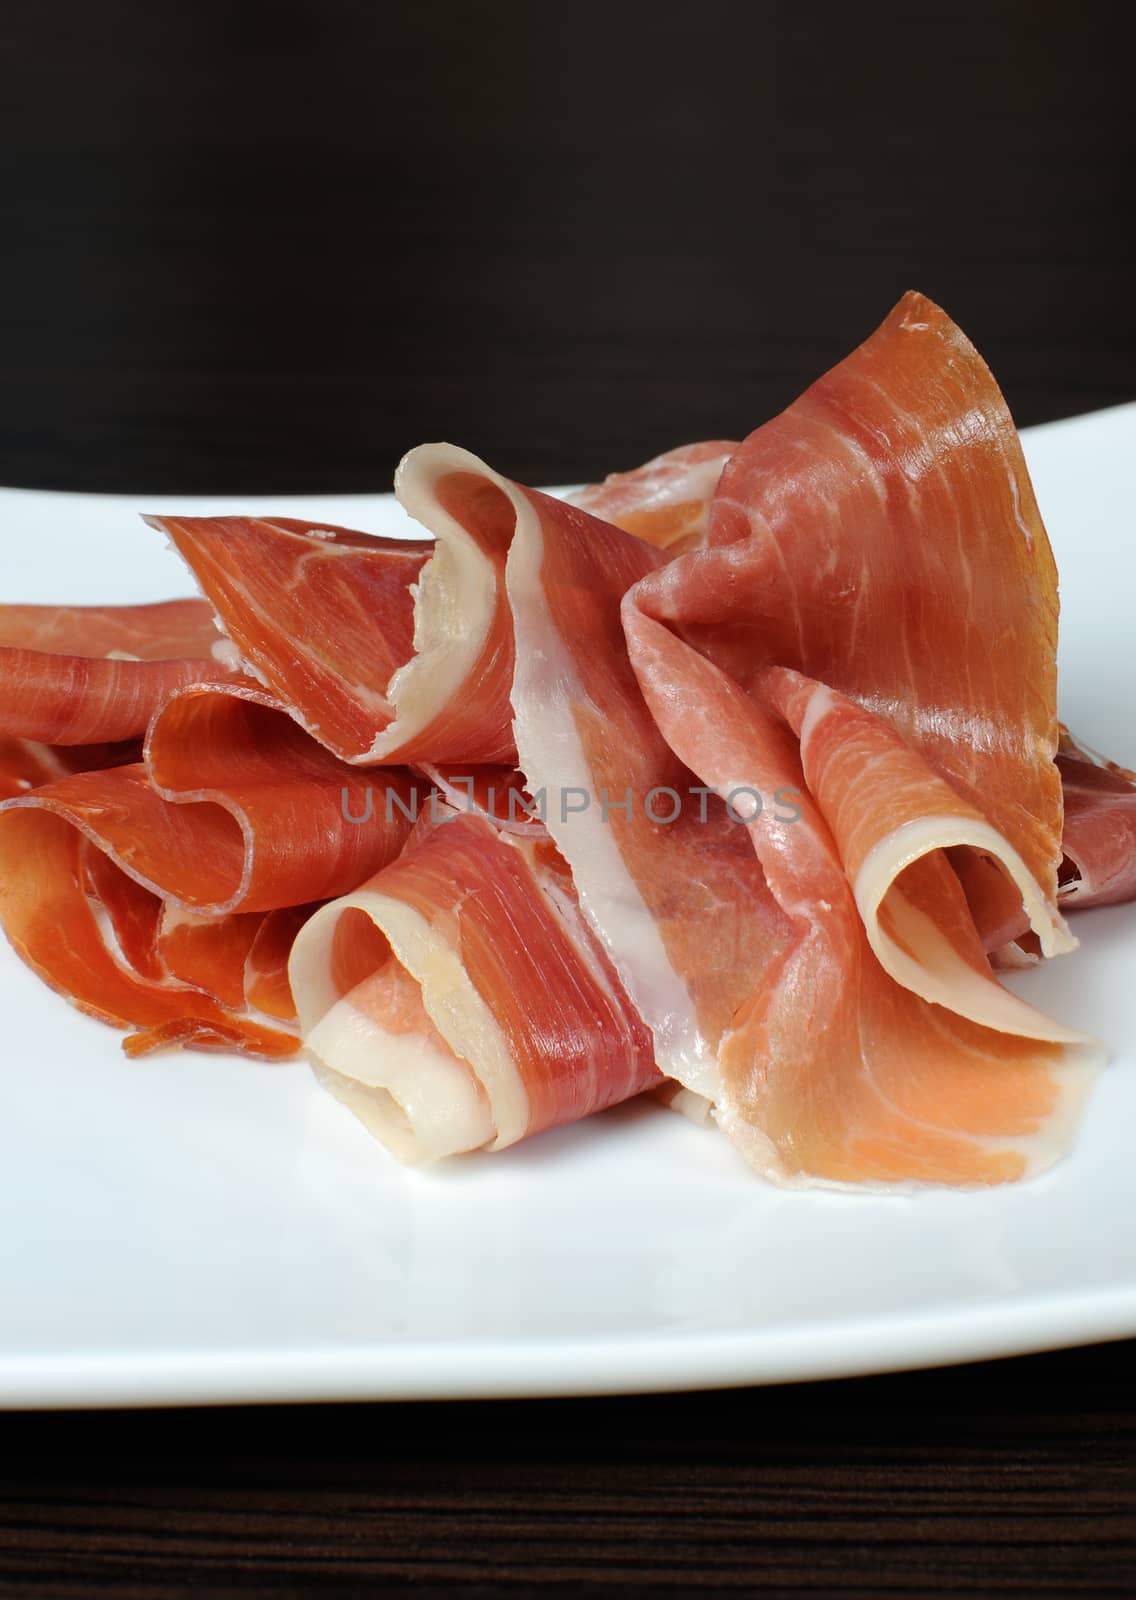 Uncooked jerked pork ham slices of jamon on a white plate